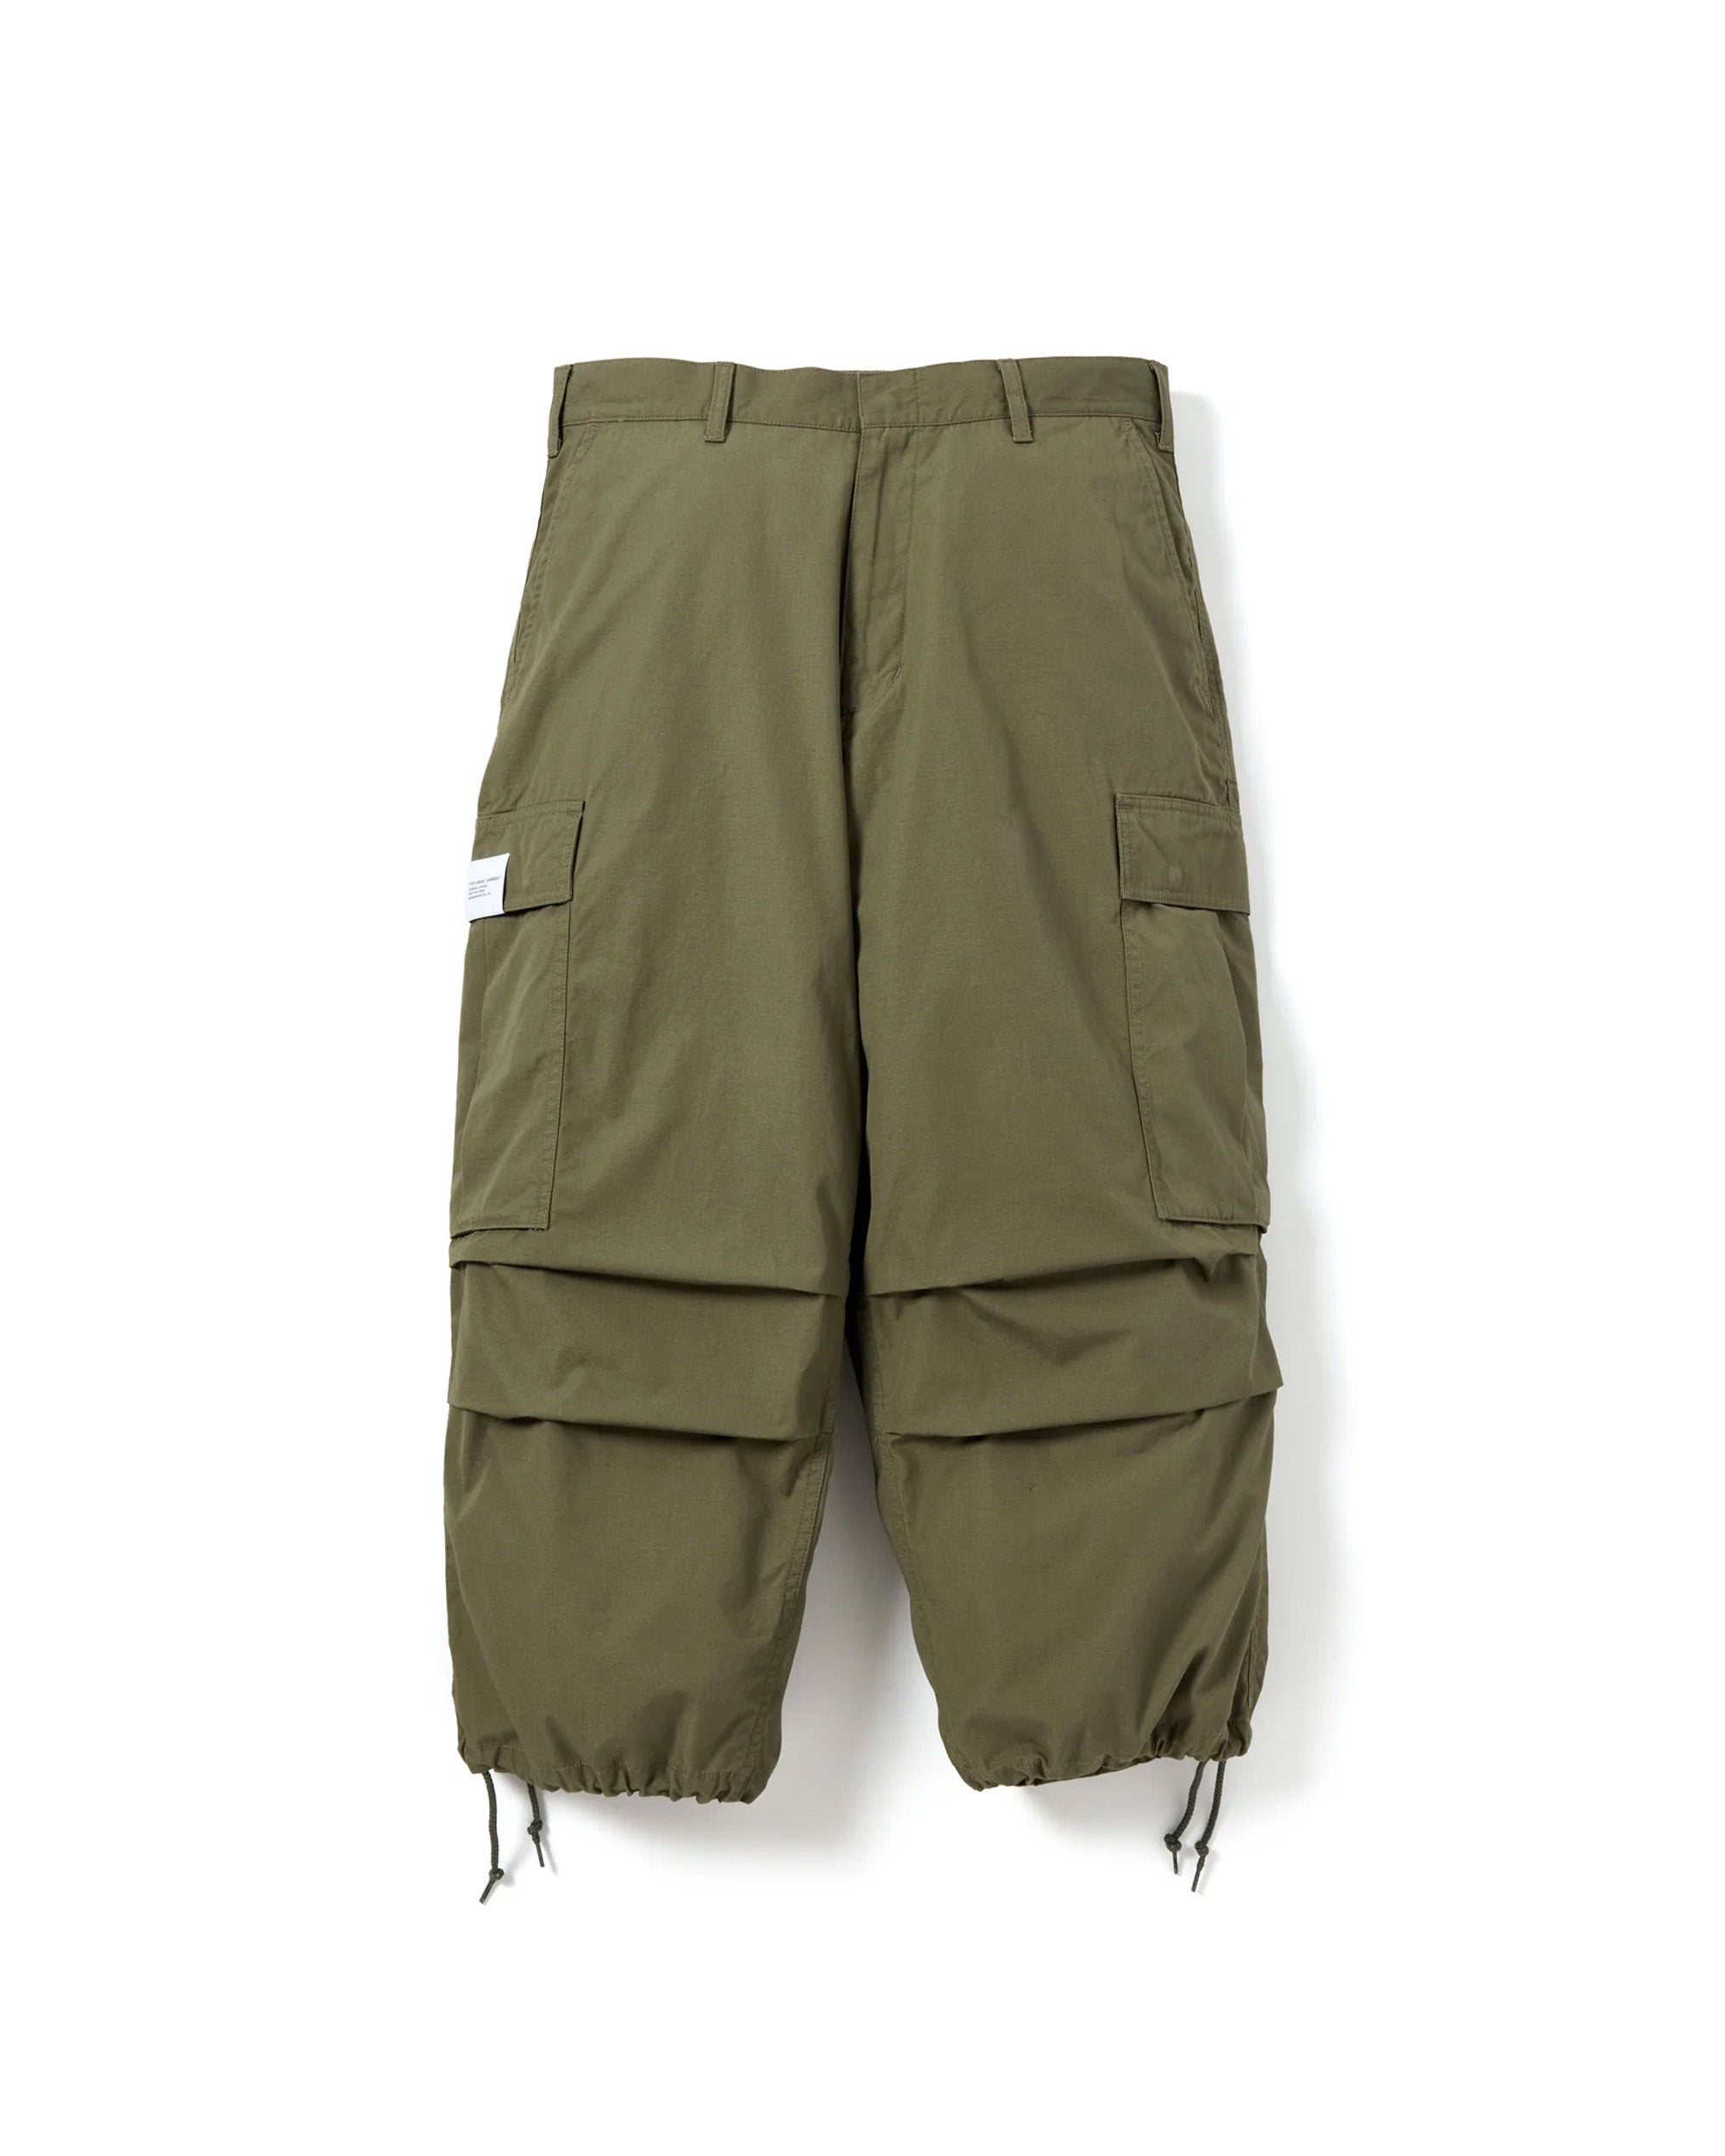 Wide Cargo Pants - Olive Drab